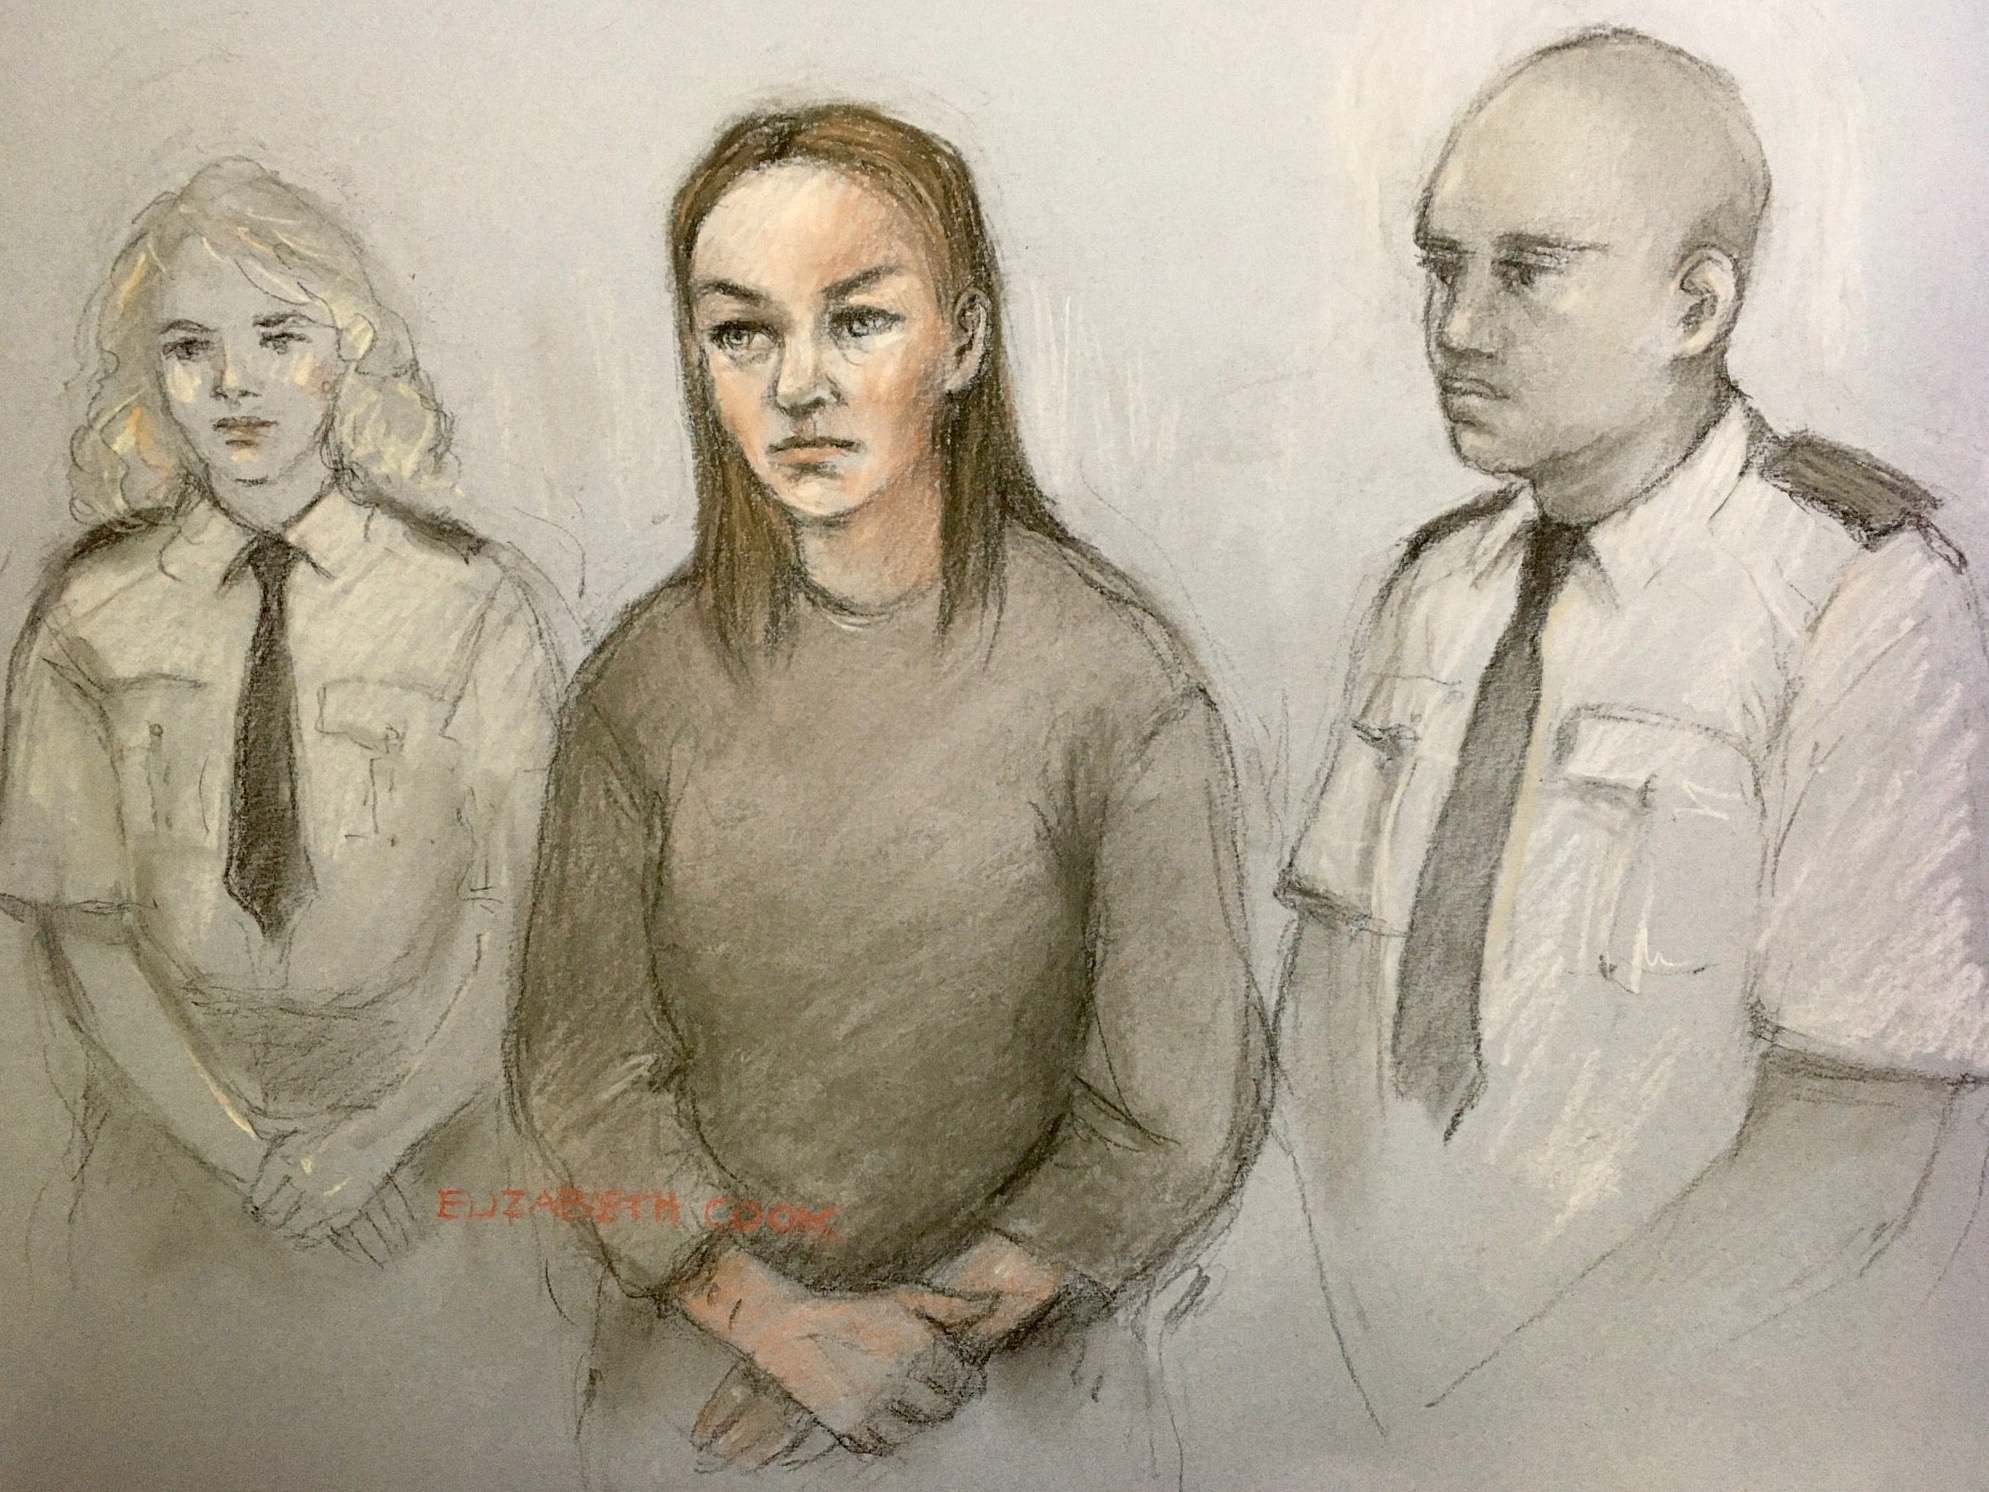 Court artist sketch of Olga Freeman, 40, appearing at the Old Bailey, London, charged with murdering her son Dylan Freeman, 10, at their home in Cumberland Park, Acton, west London on 16 August 2020.